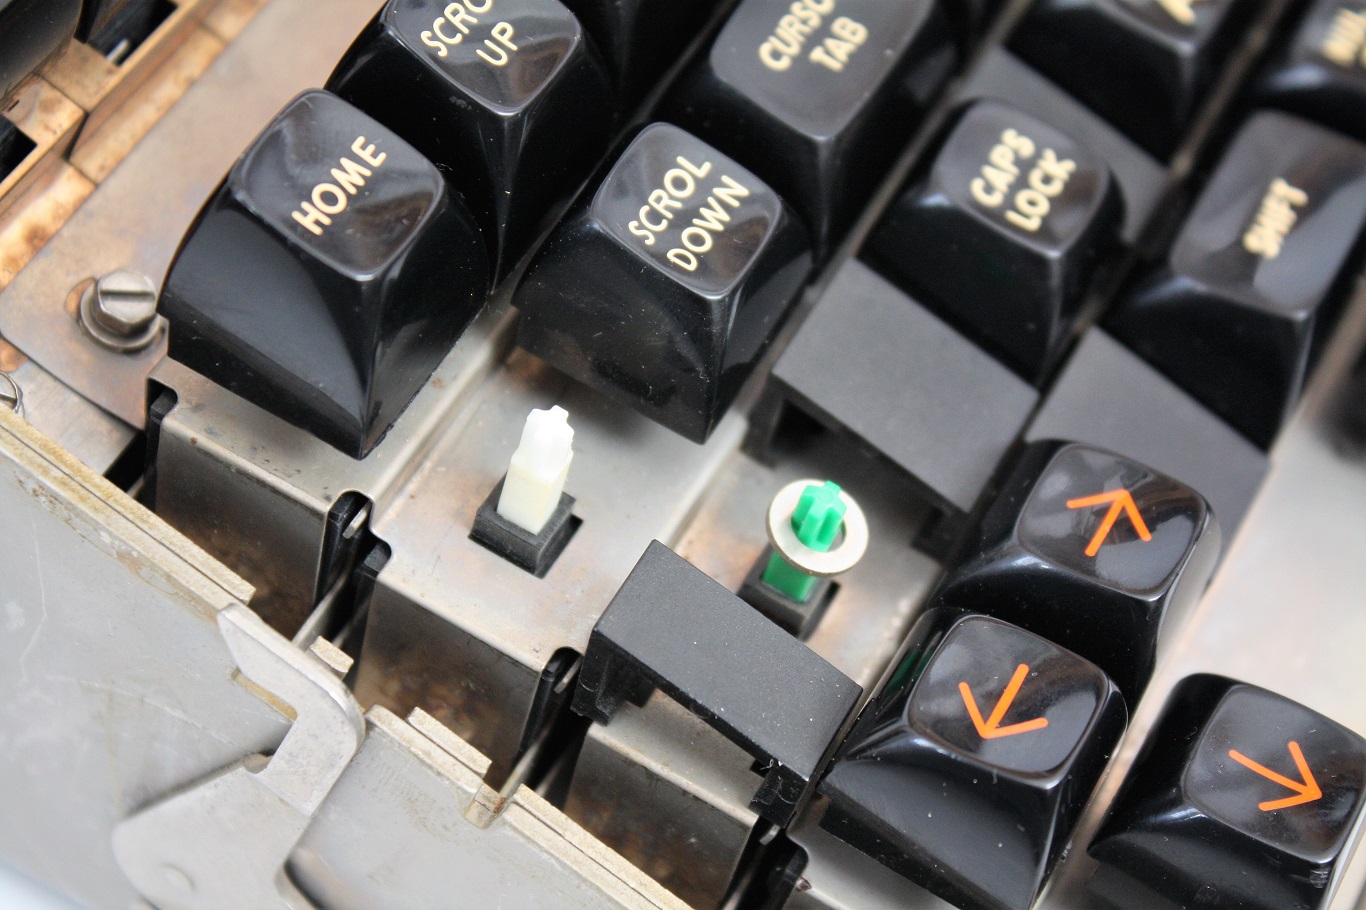 Teletype 40K 103 RCB - white and green key switches